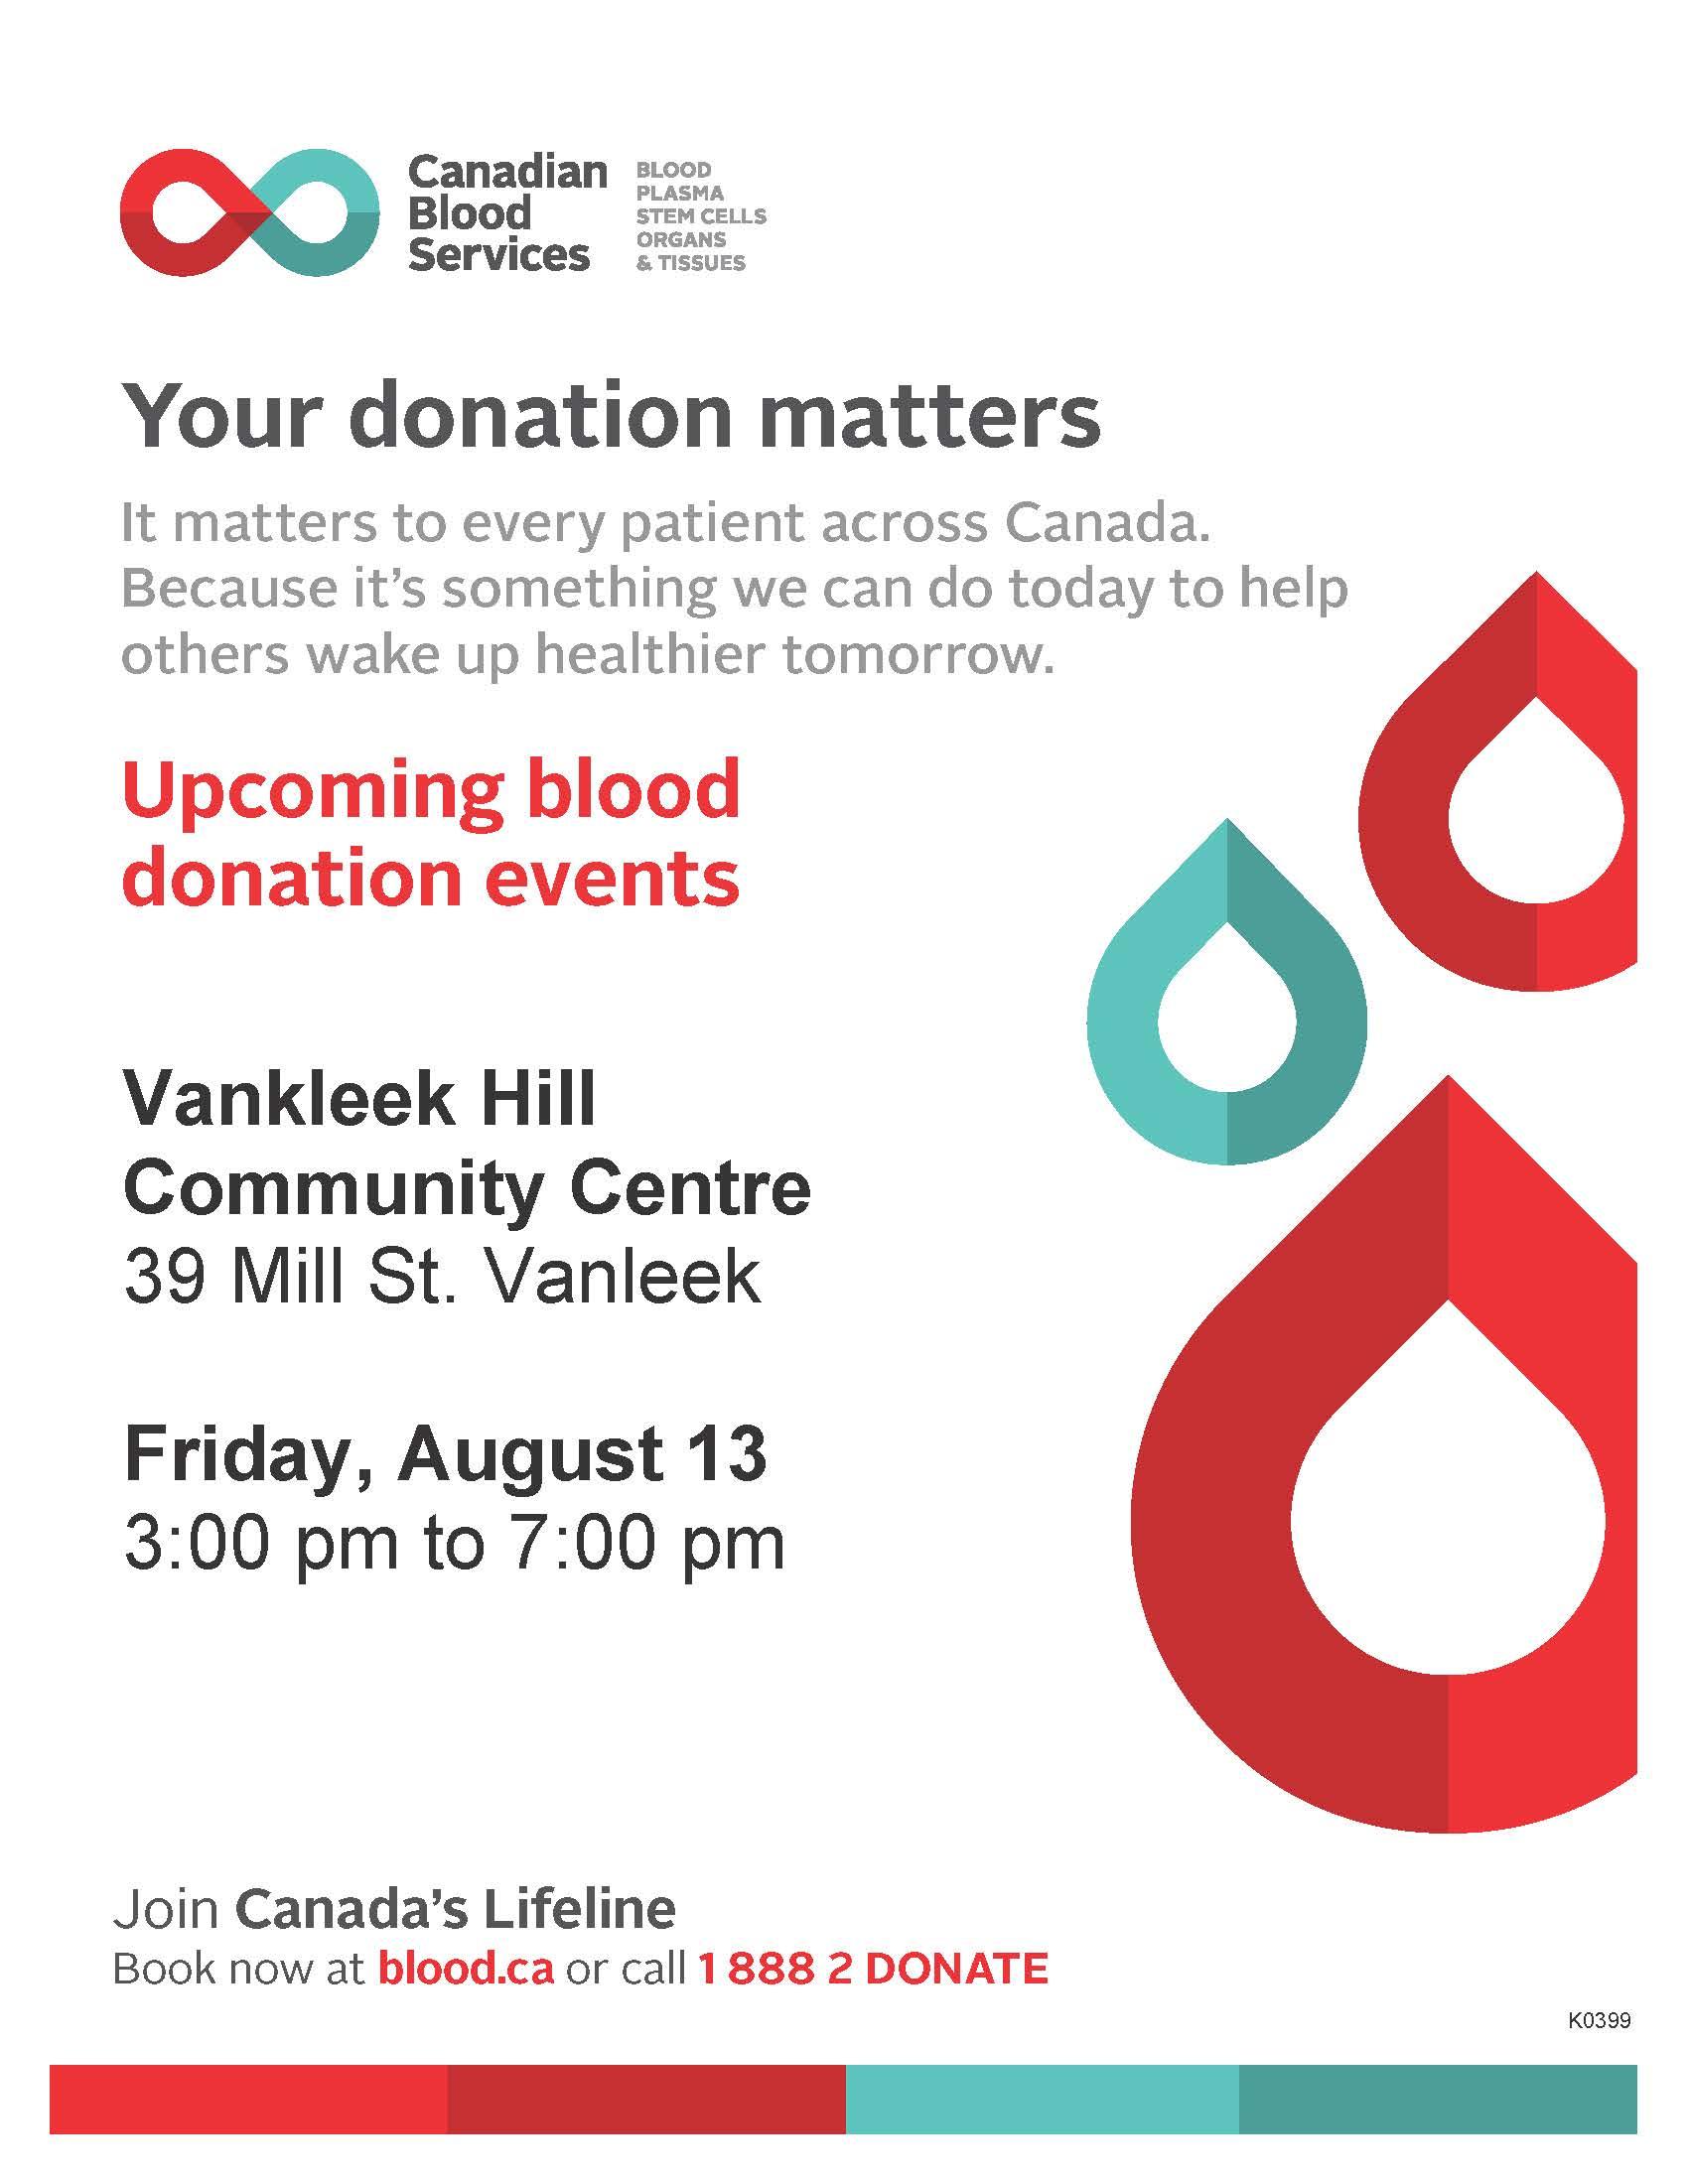 Register now for August 13 Vankleek Hill Canadian Blood Services donation clinic